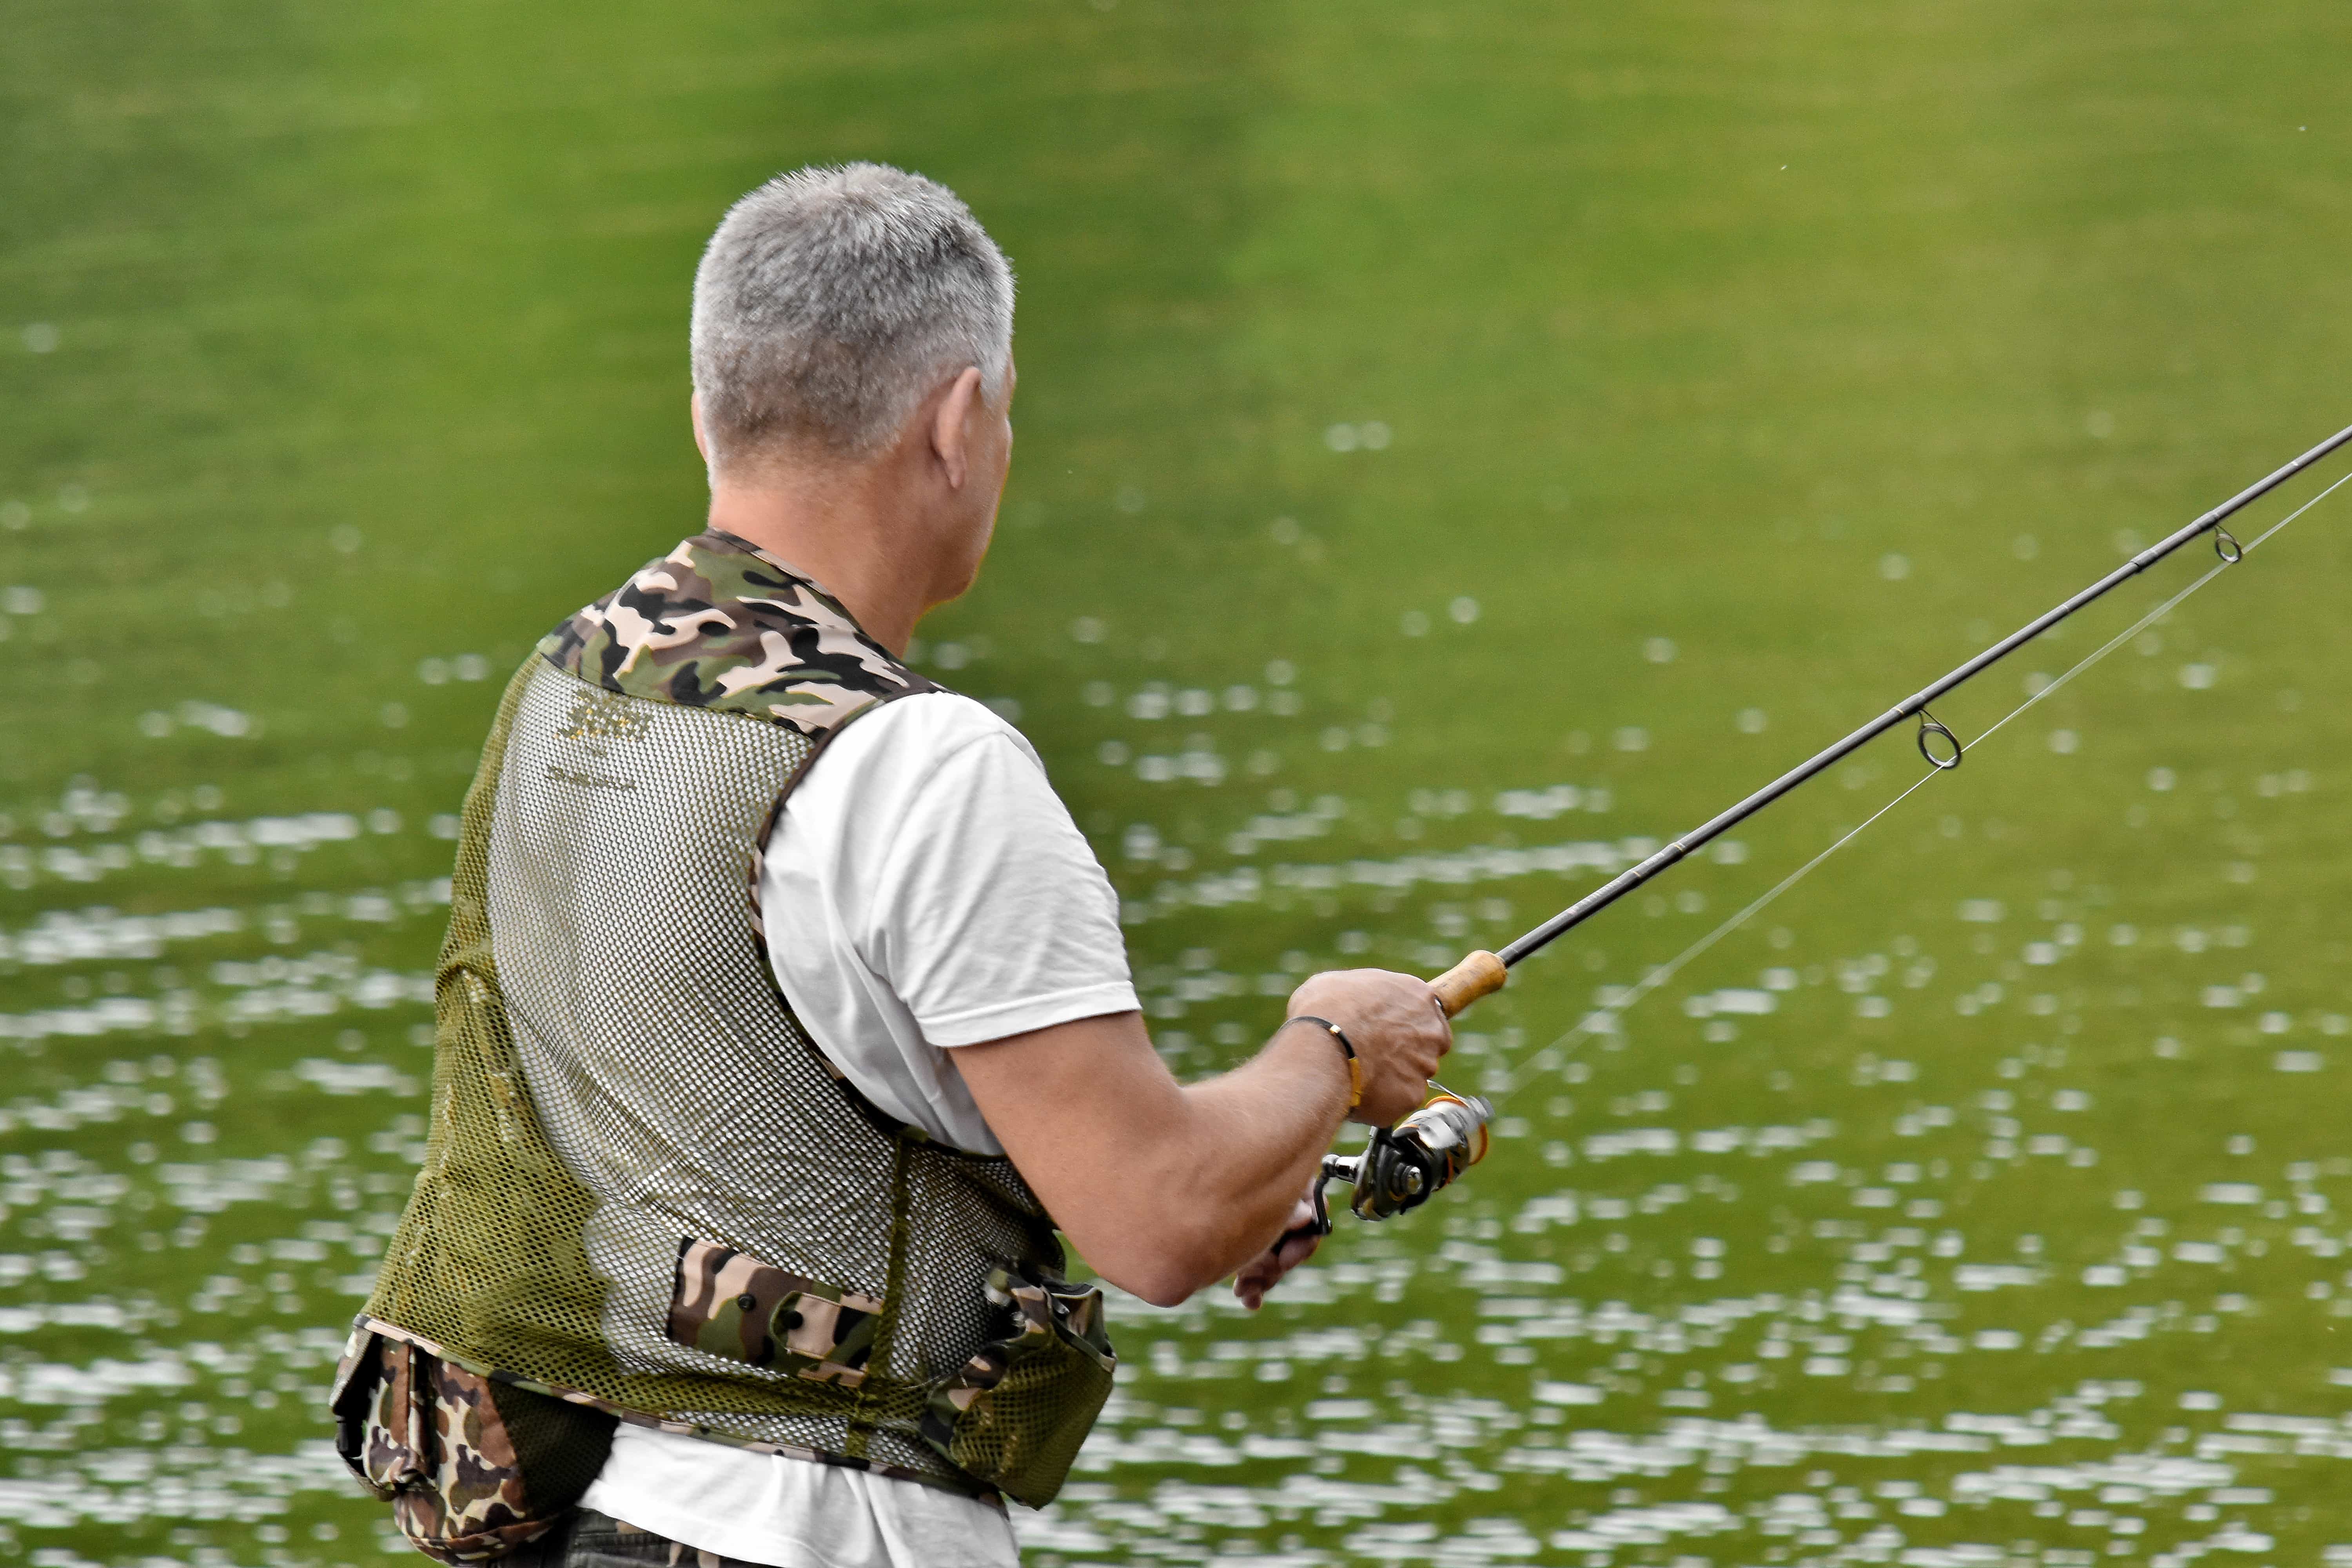 Free picture: fisherman, fishing gear, fly fishing, landscape, professional, river, sport, water, leisure, man